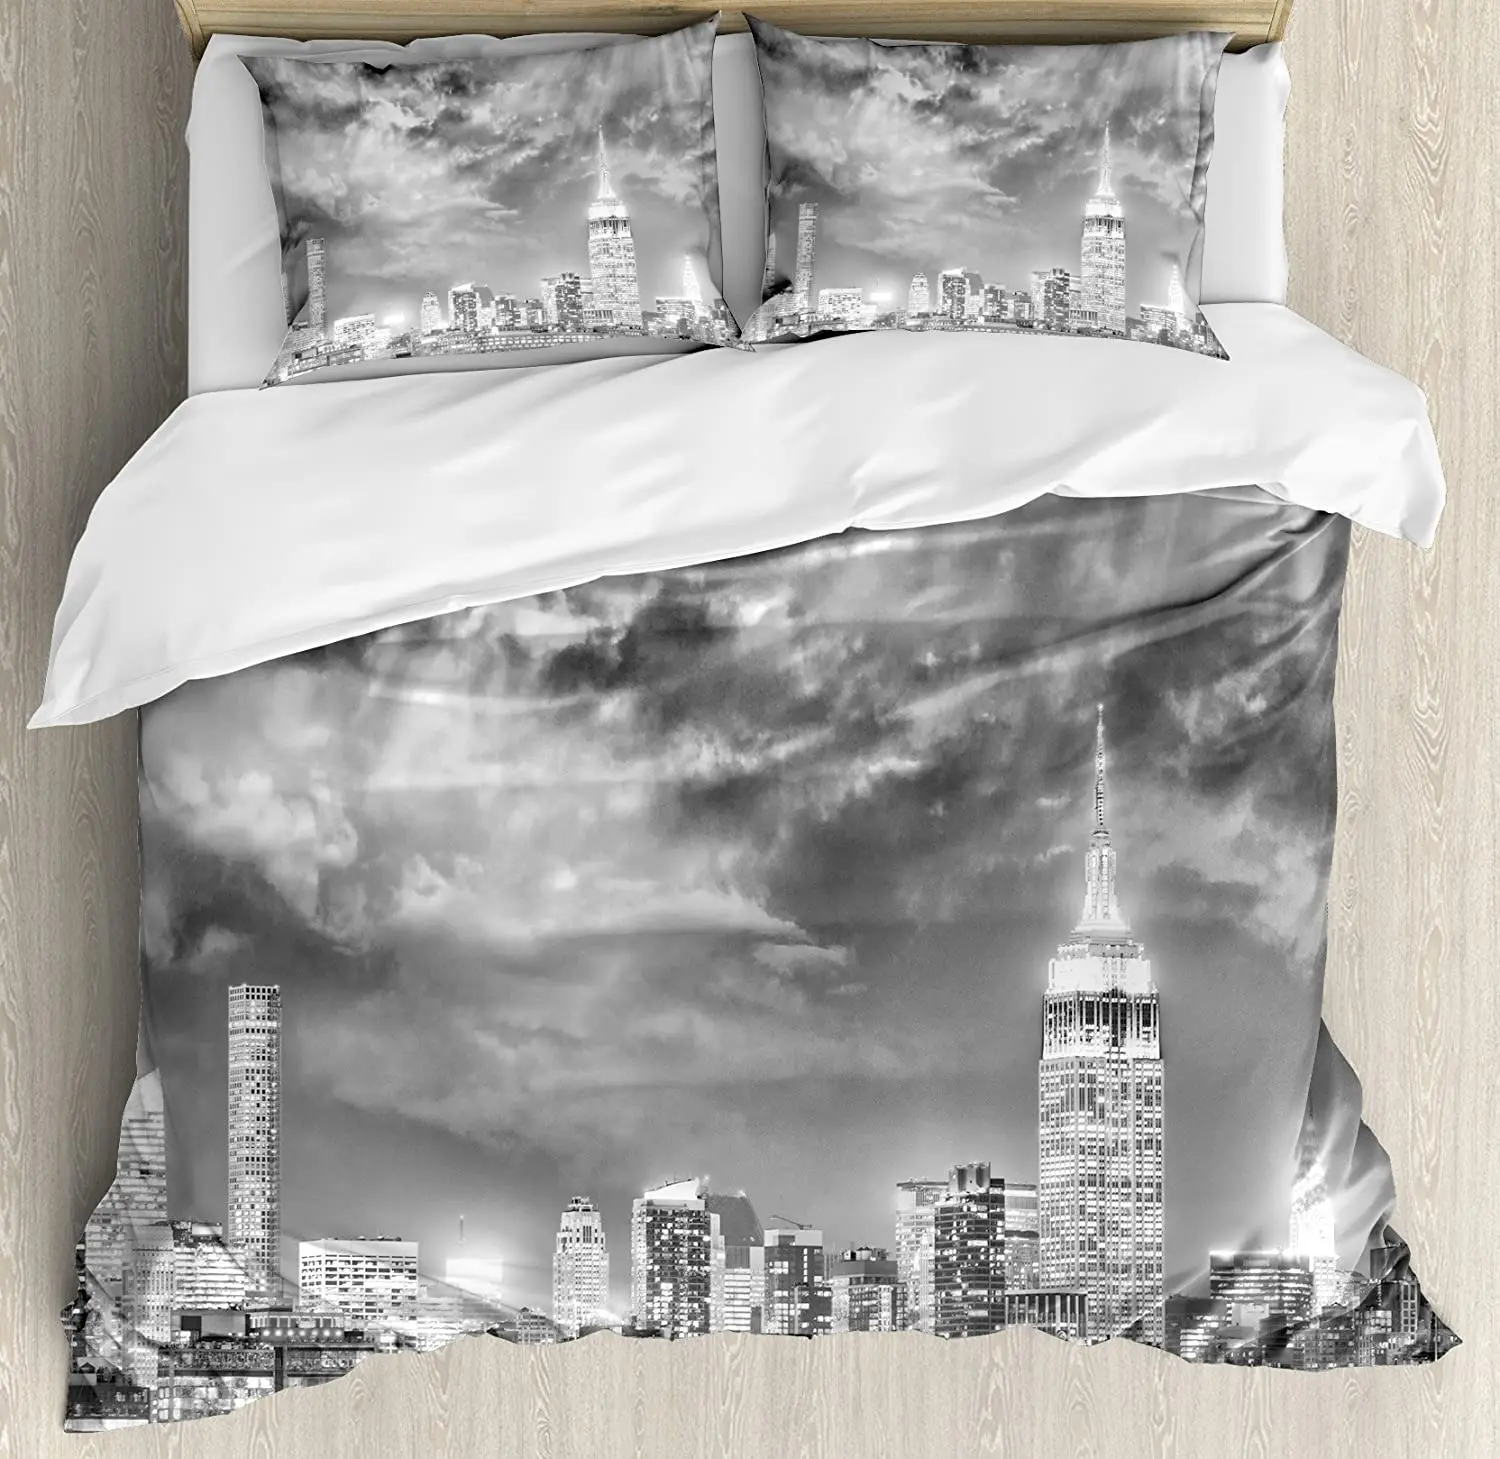 

Urban Bedding Set For Bedroom Bed Home Dramatic New York City Skyline Sun Beams Clouds Sk Duvet Cover Quilt Cover And Pillowcase